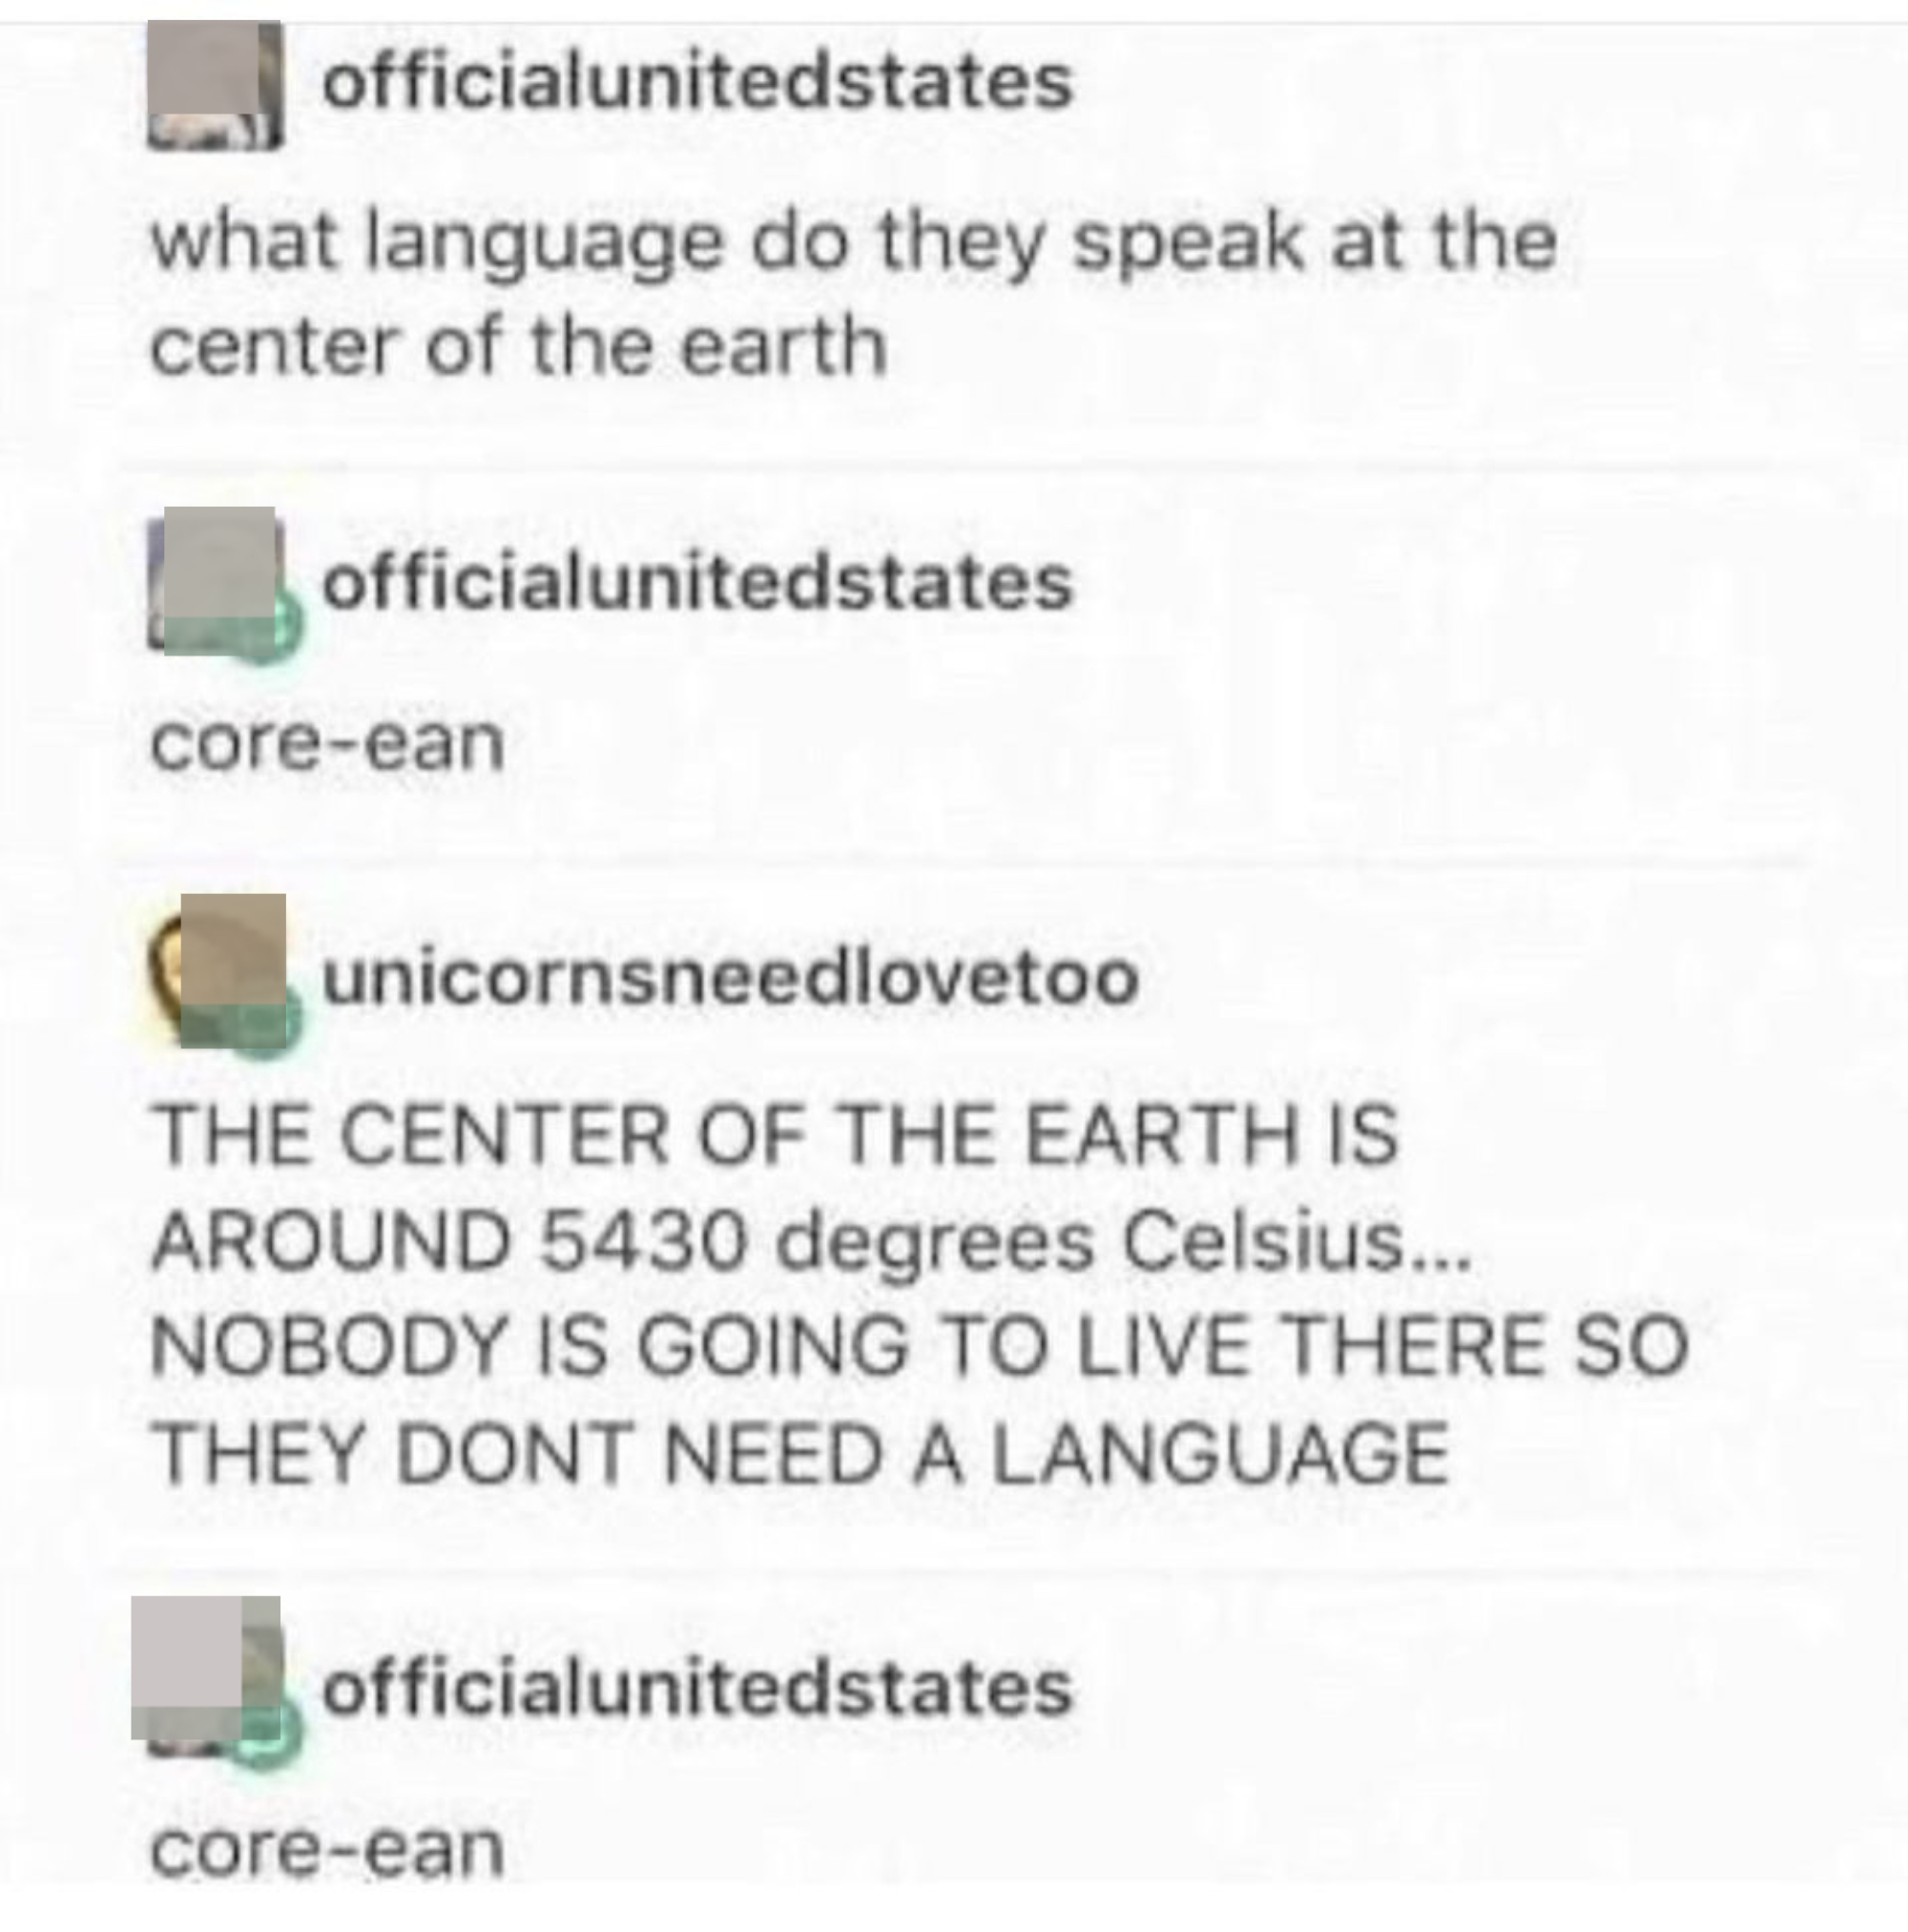 &quot;What language do they speak at the center of the earth,&quot; &quot;core-ean,&quot; &quot;The center of the earth is around 5,430 degrees Celsius, nobody is going to leave there so they don&#x27;t need a language, &quot; &quot;core-ean&quot;